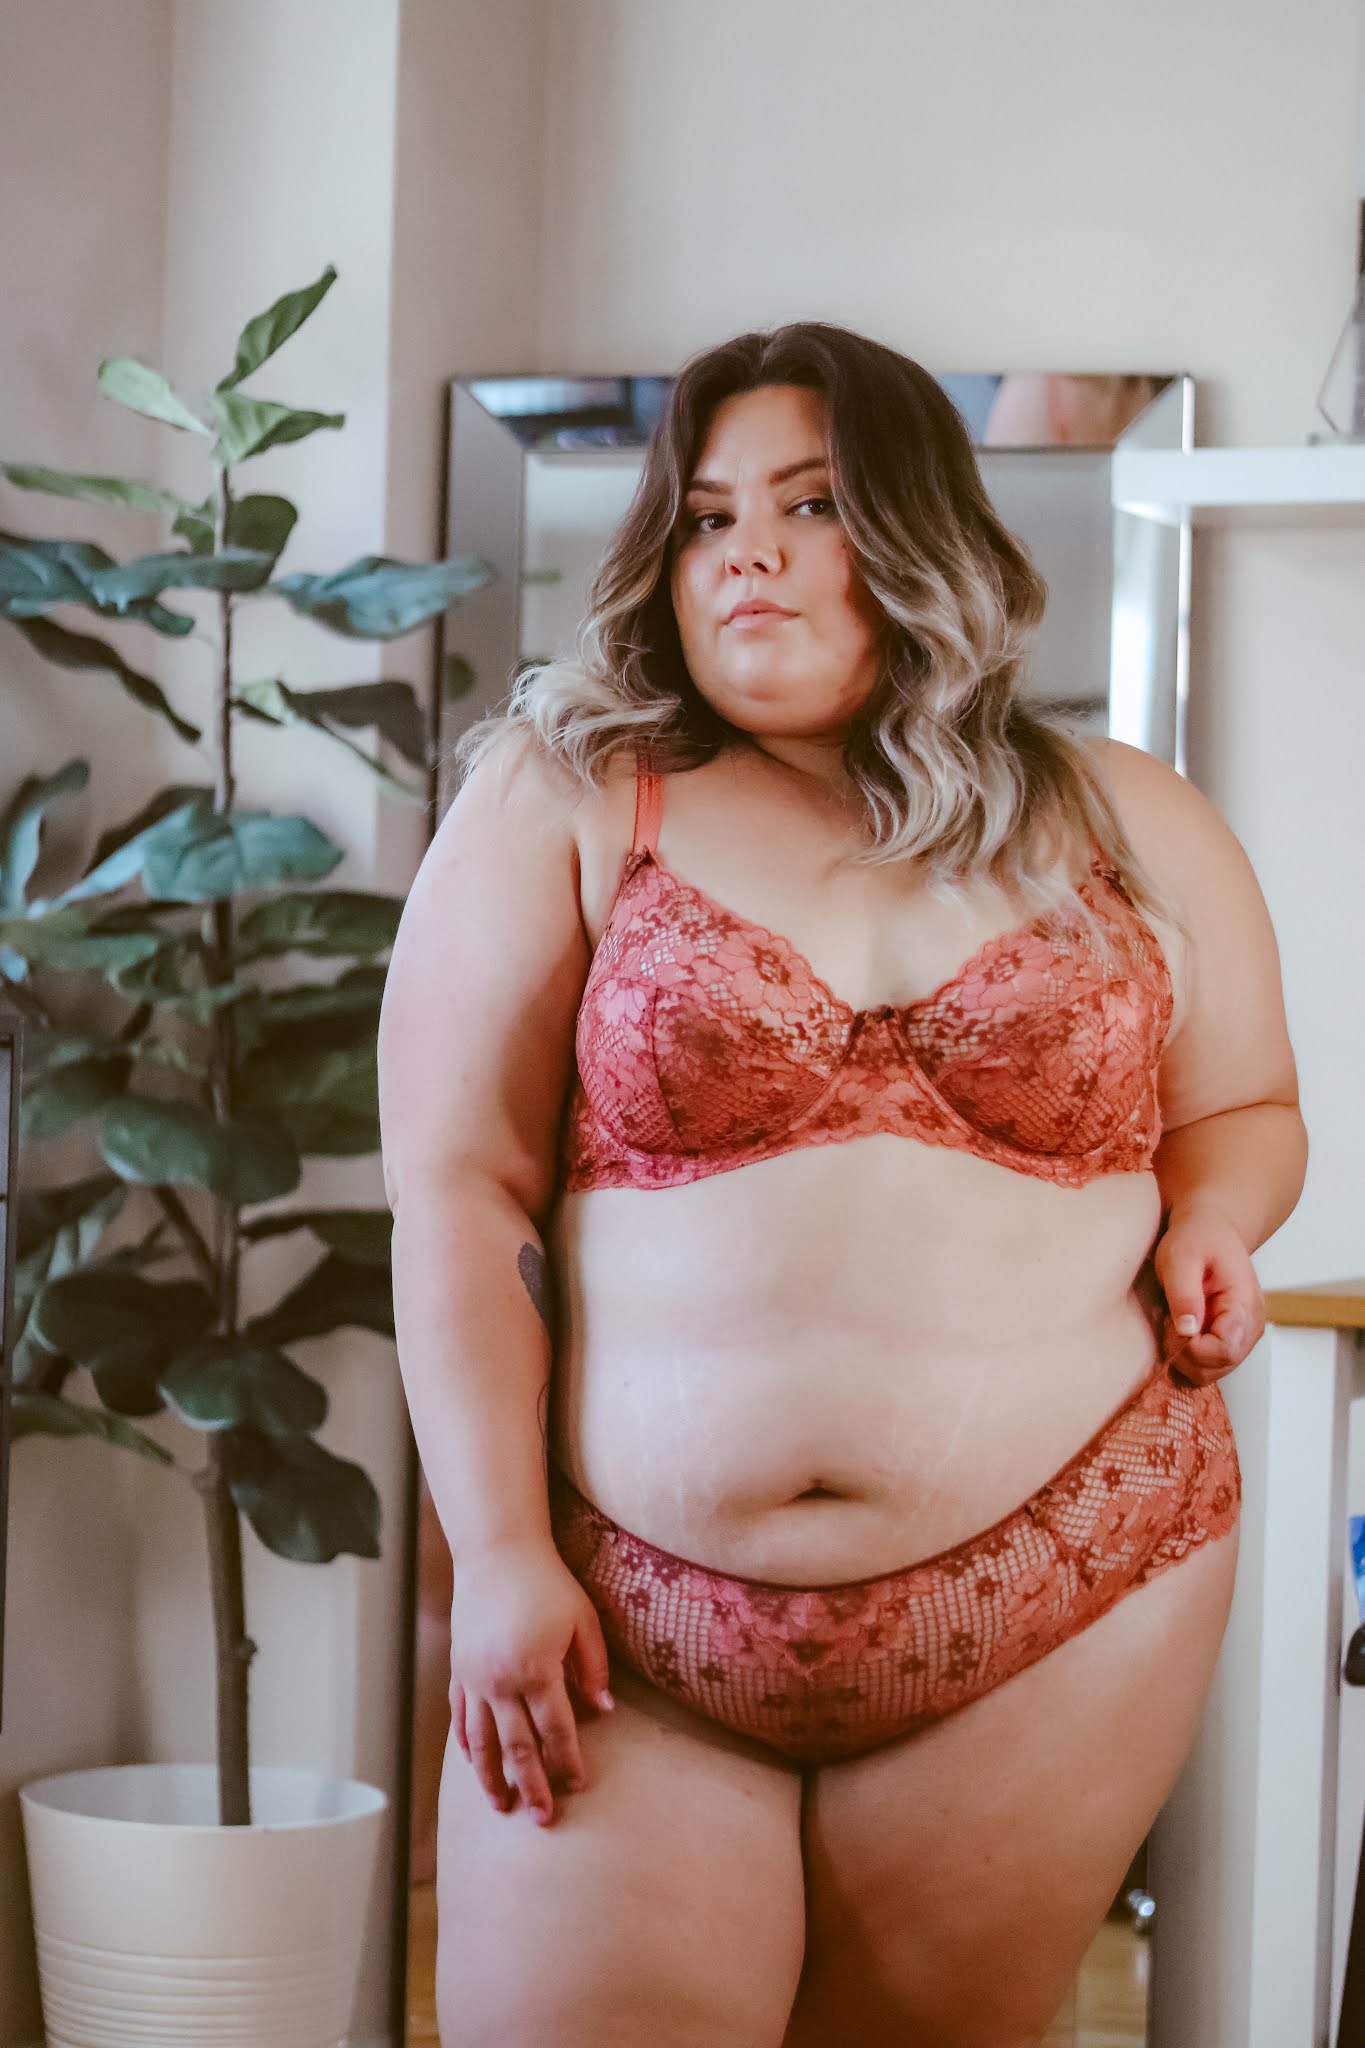 Chicago petite plus size fashion blogger Natalie in the City reviews Adore Me's confidence-boosting bras and panties.